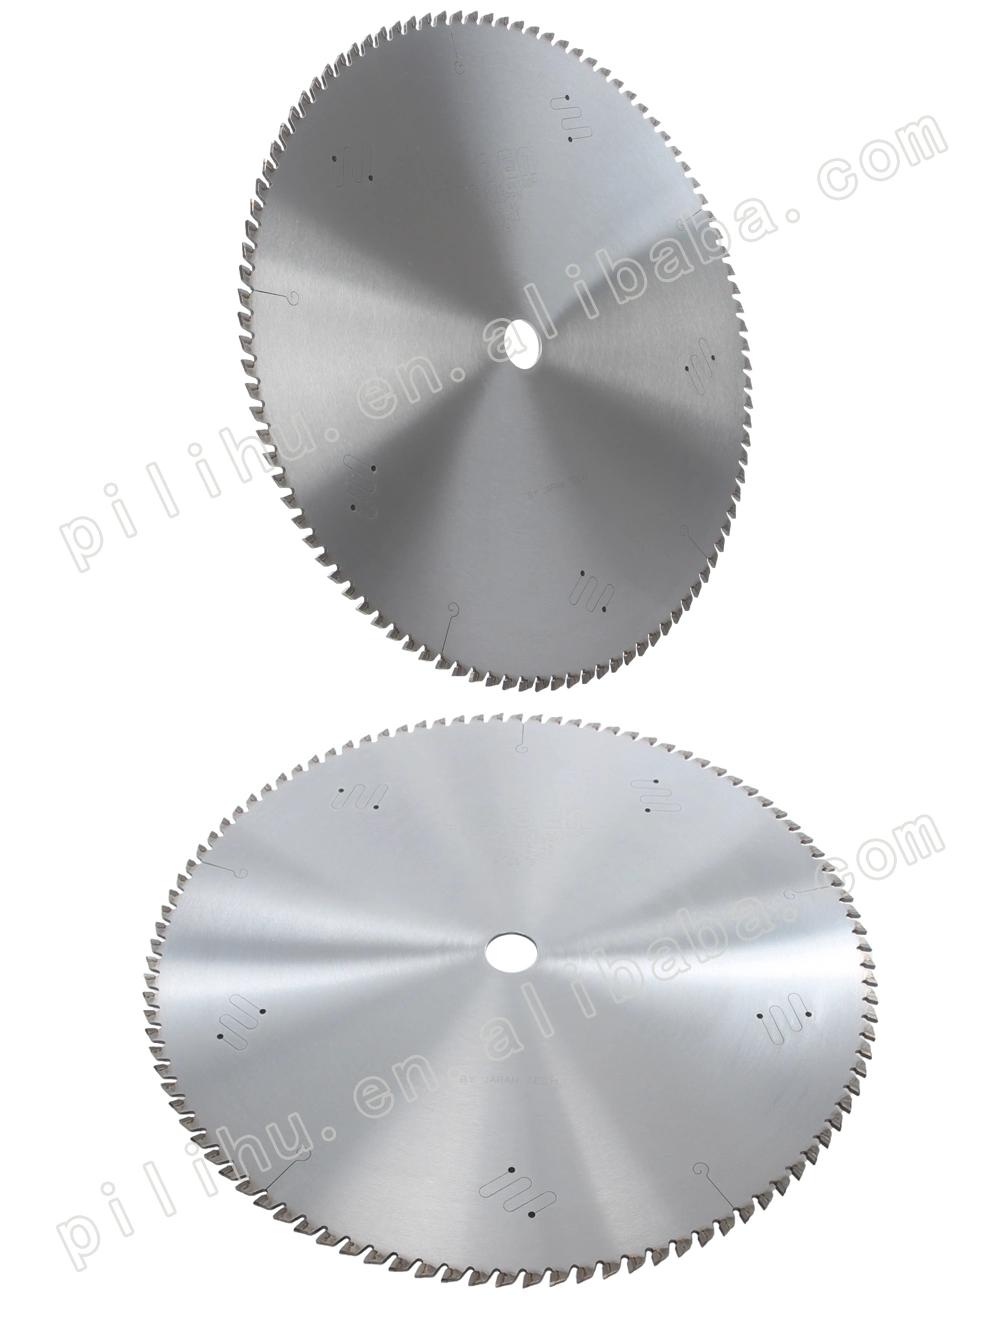 Saw Blade for Aluminum Cutting Tipped Blade for Metal